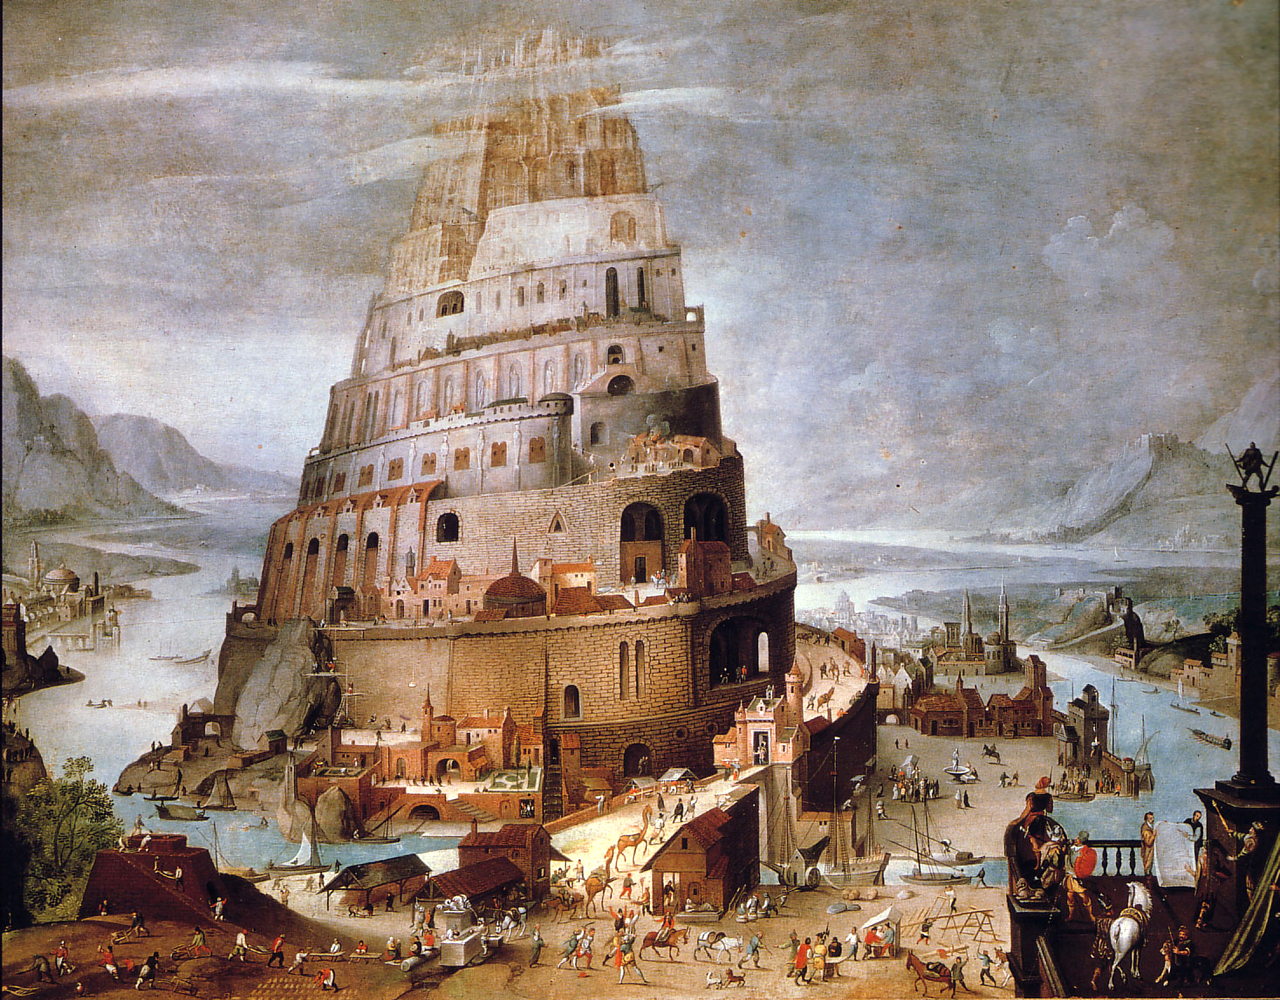 Amazing Tower Of Babel Pictures & Backgrounds